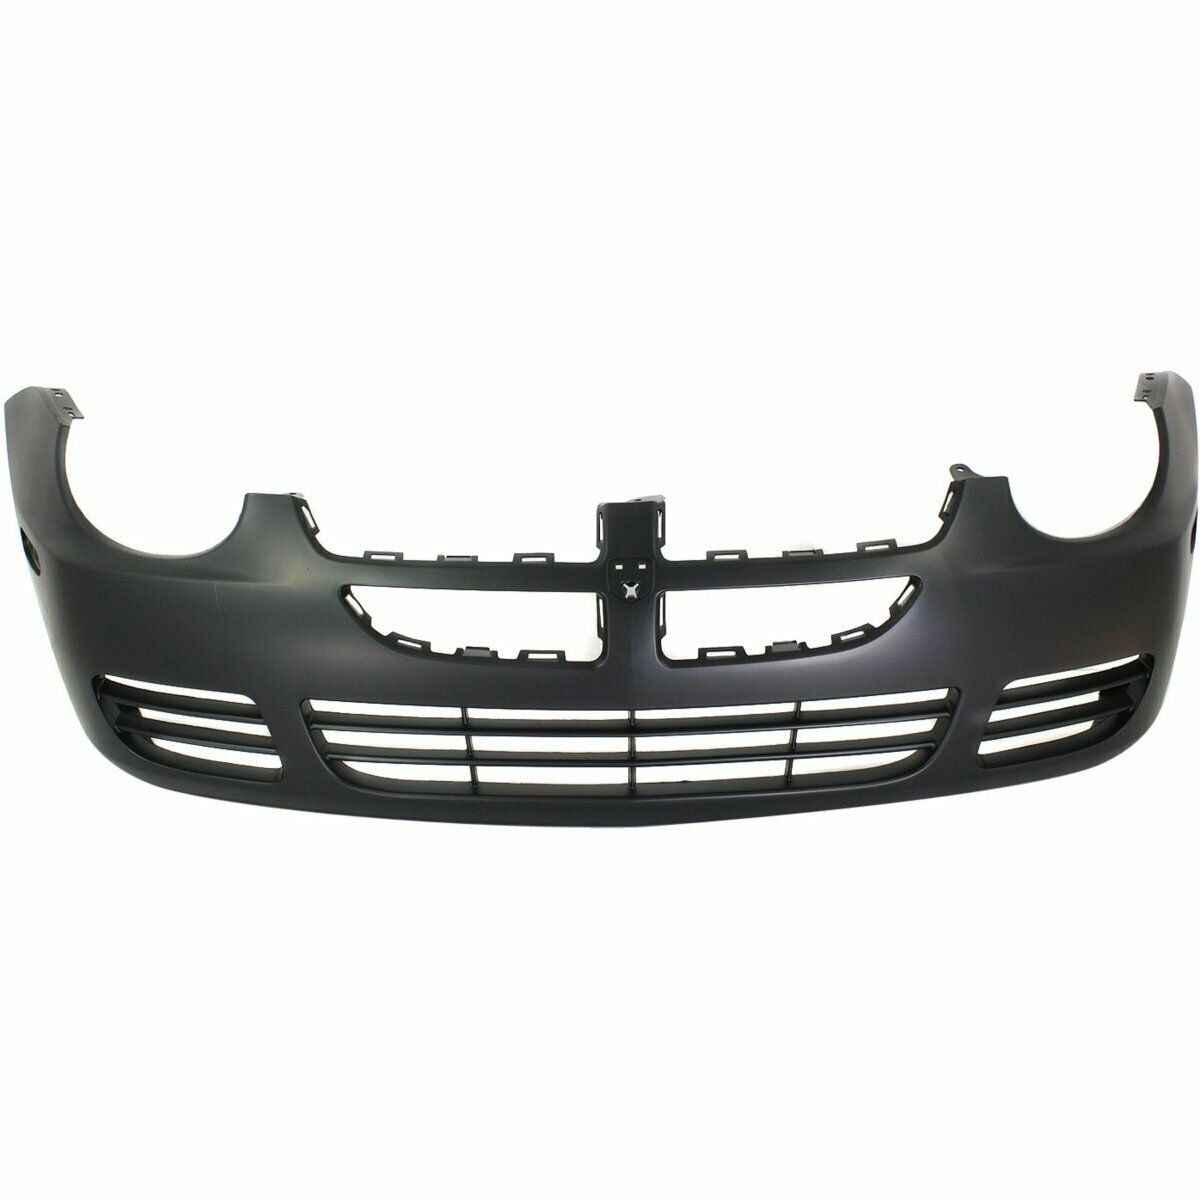 2003-2005 Dodge Neon w/o Fog Front Bumper Painted to Match